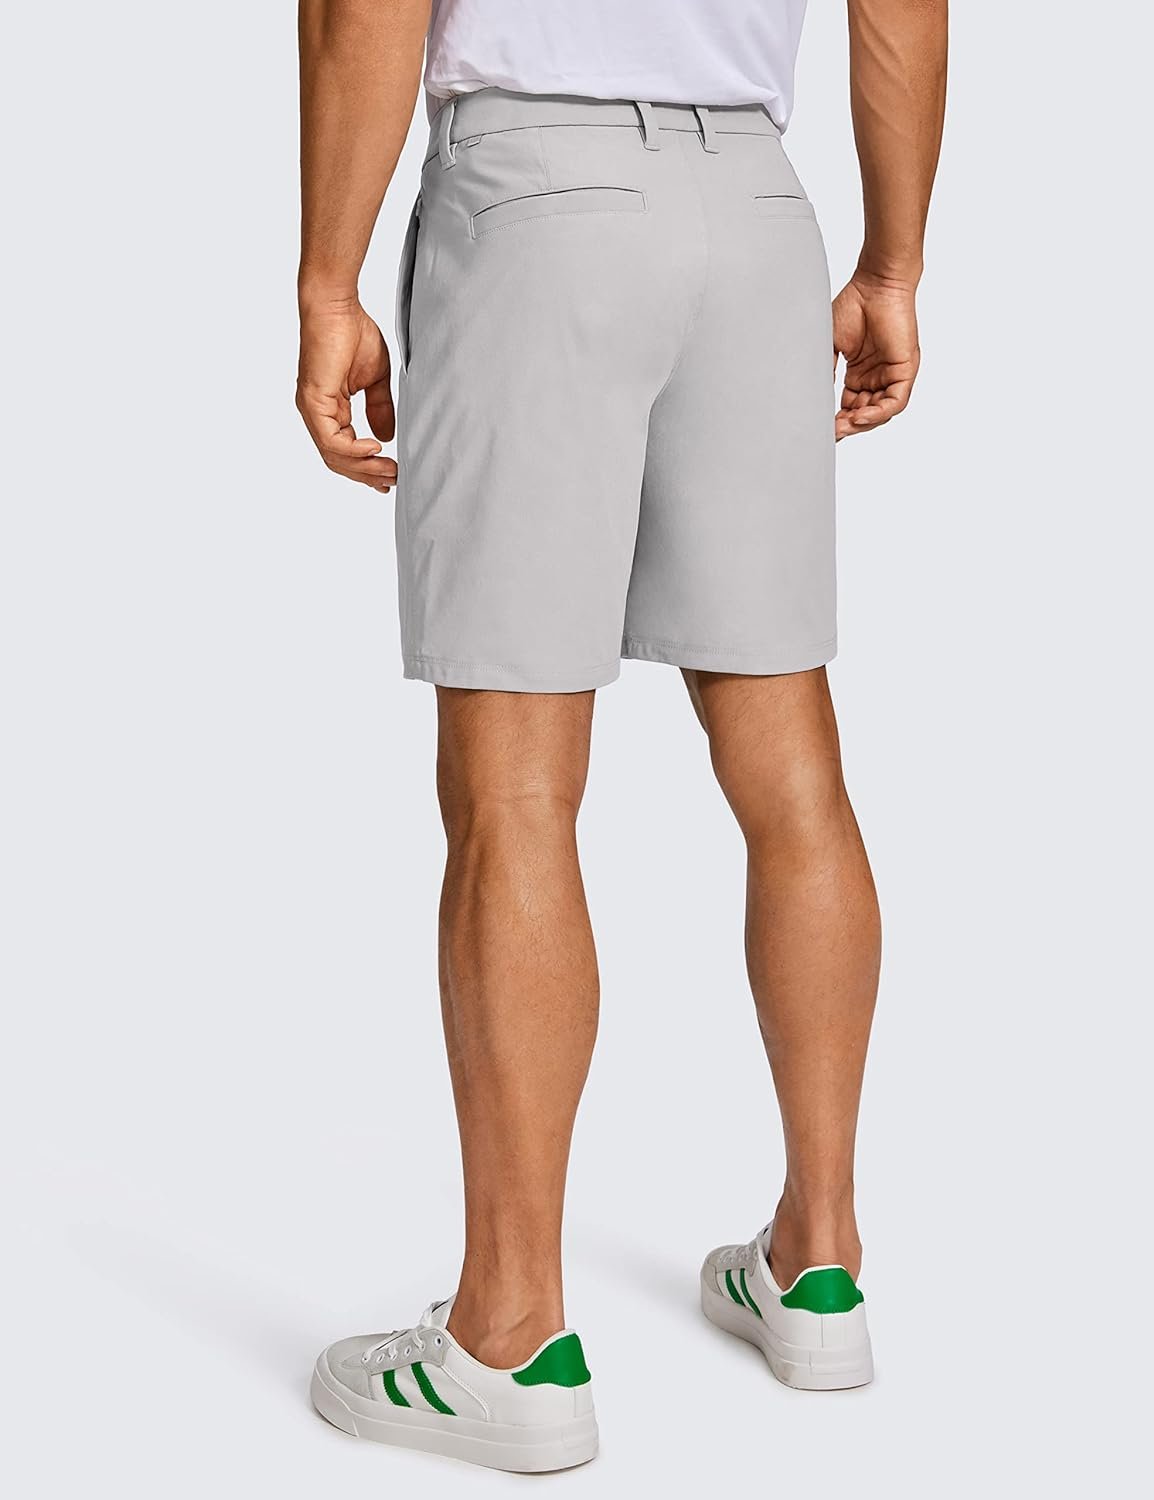 CRZ YOGA Mens All-Day Comfort Golf Shorts - 7/ 9 Stretch Lightweight Casual Work Flat Front Shorts with Pockets